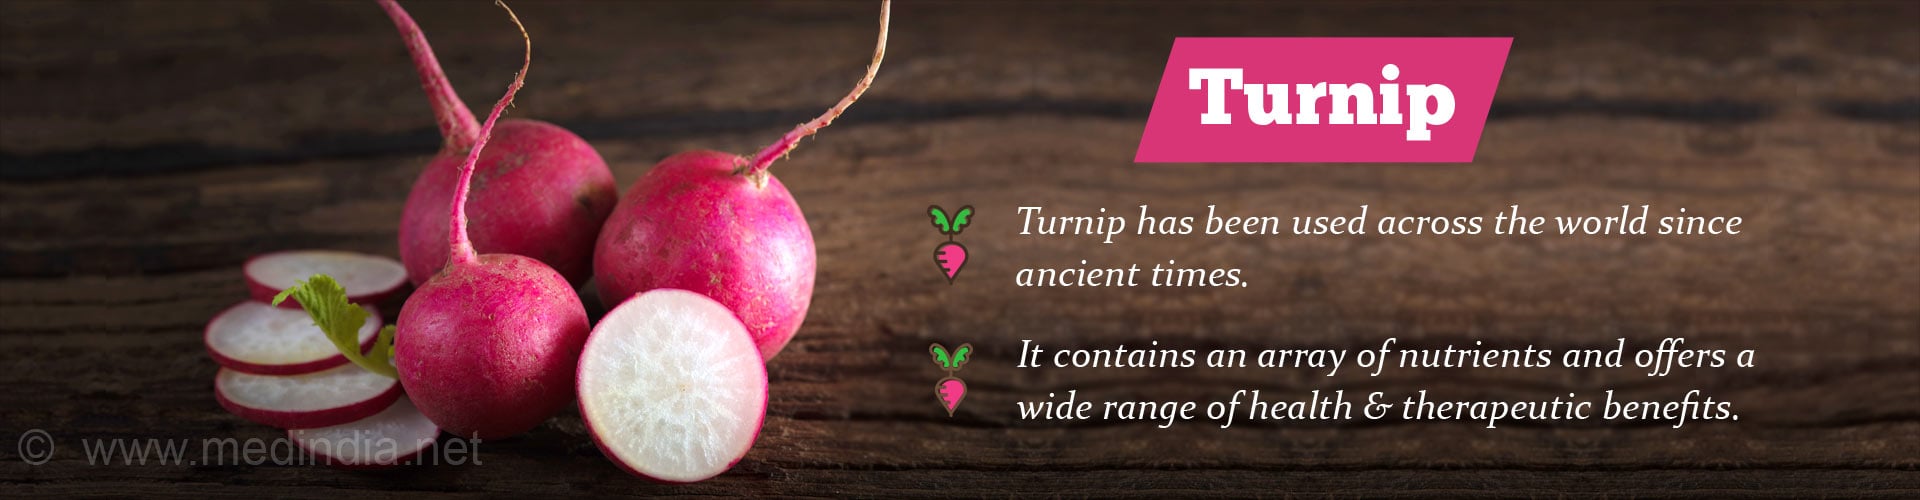 Turnip
- Turnip has been used across the world since ancient times
- It contains an array of nutrients and offers a wide range of health and therapeutic benefits